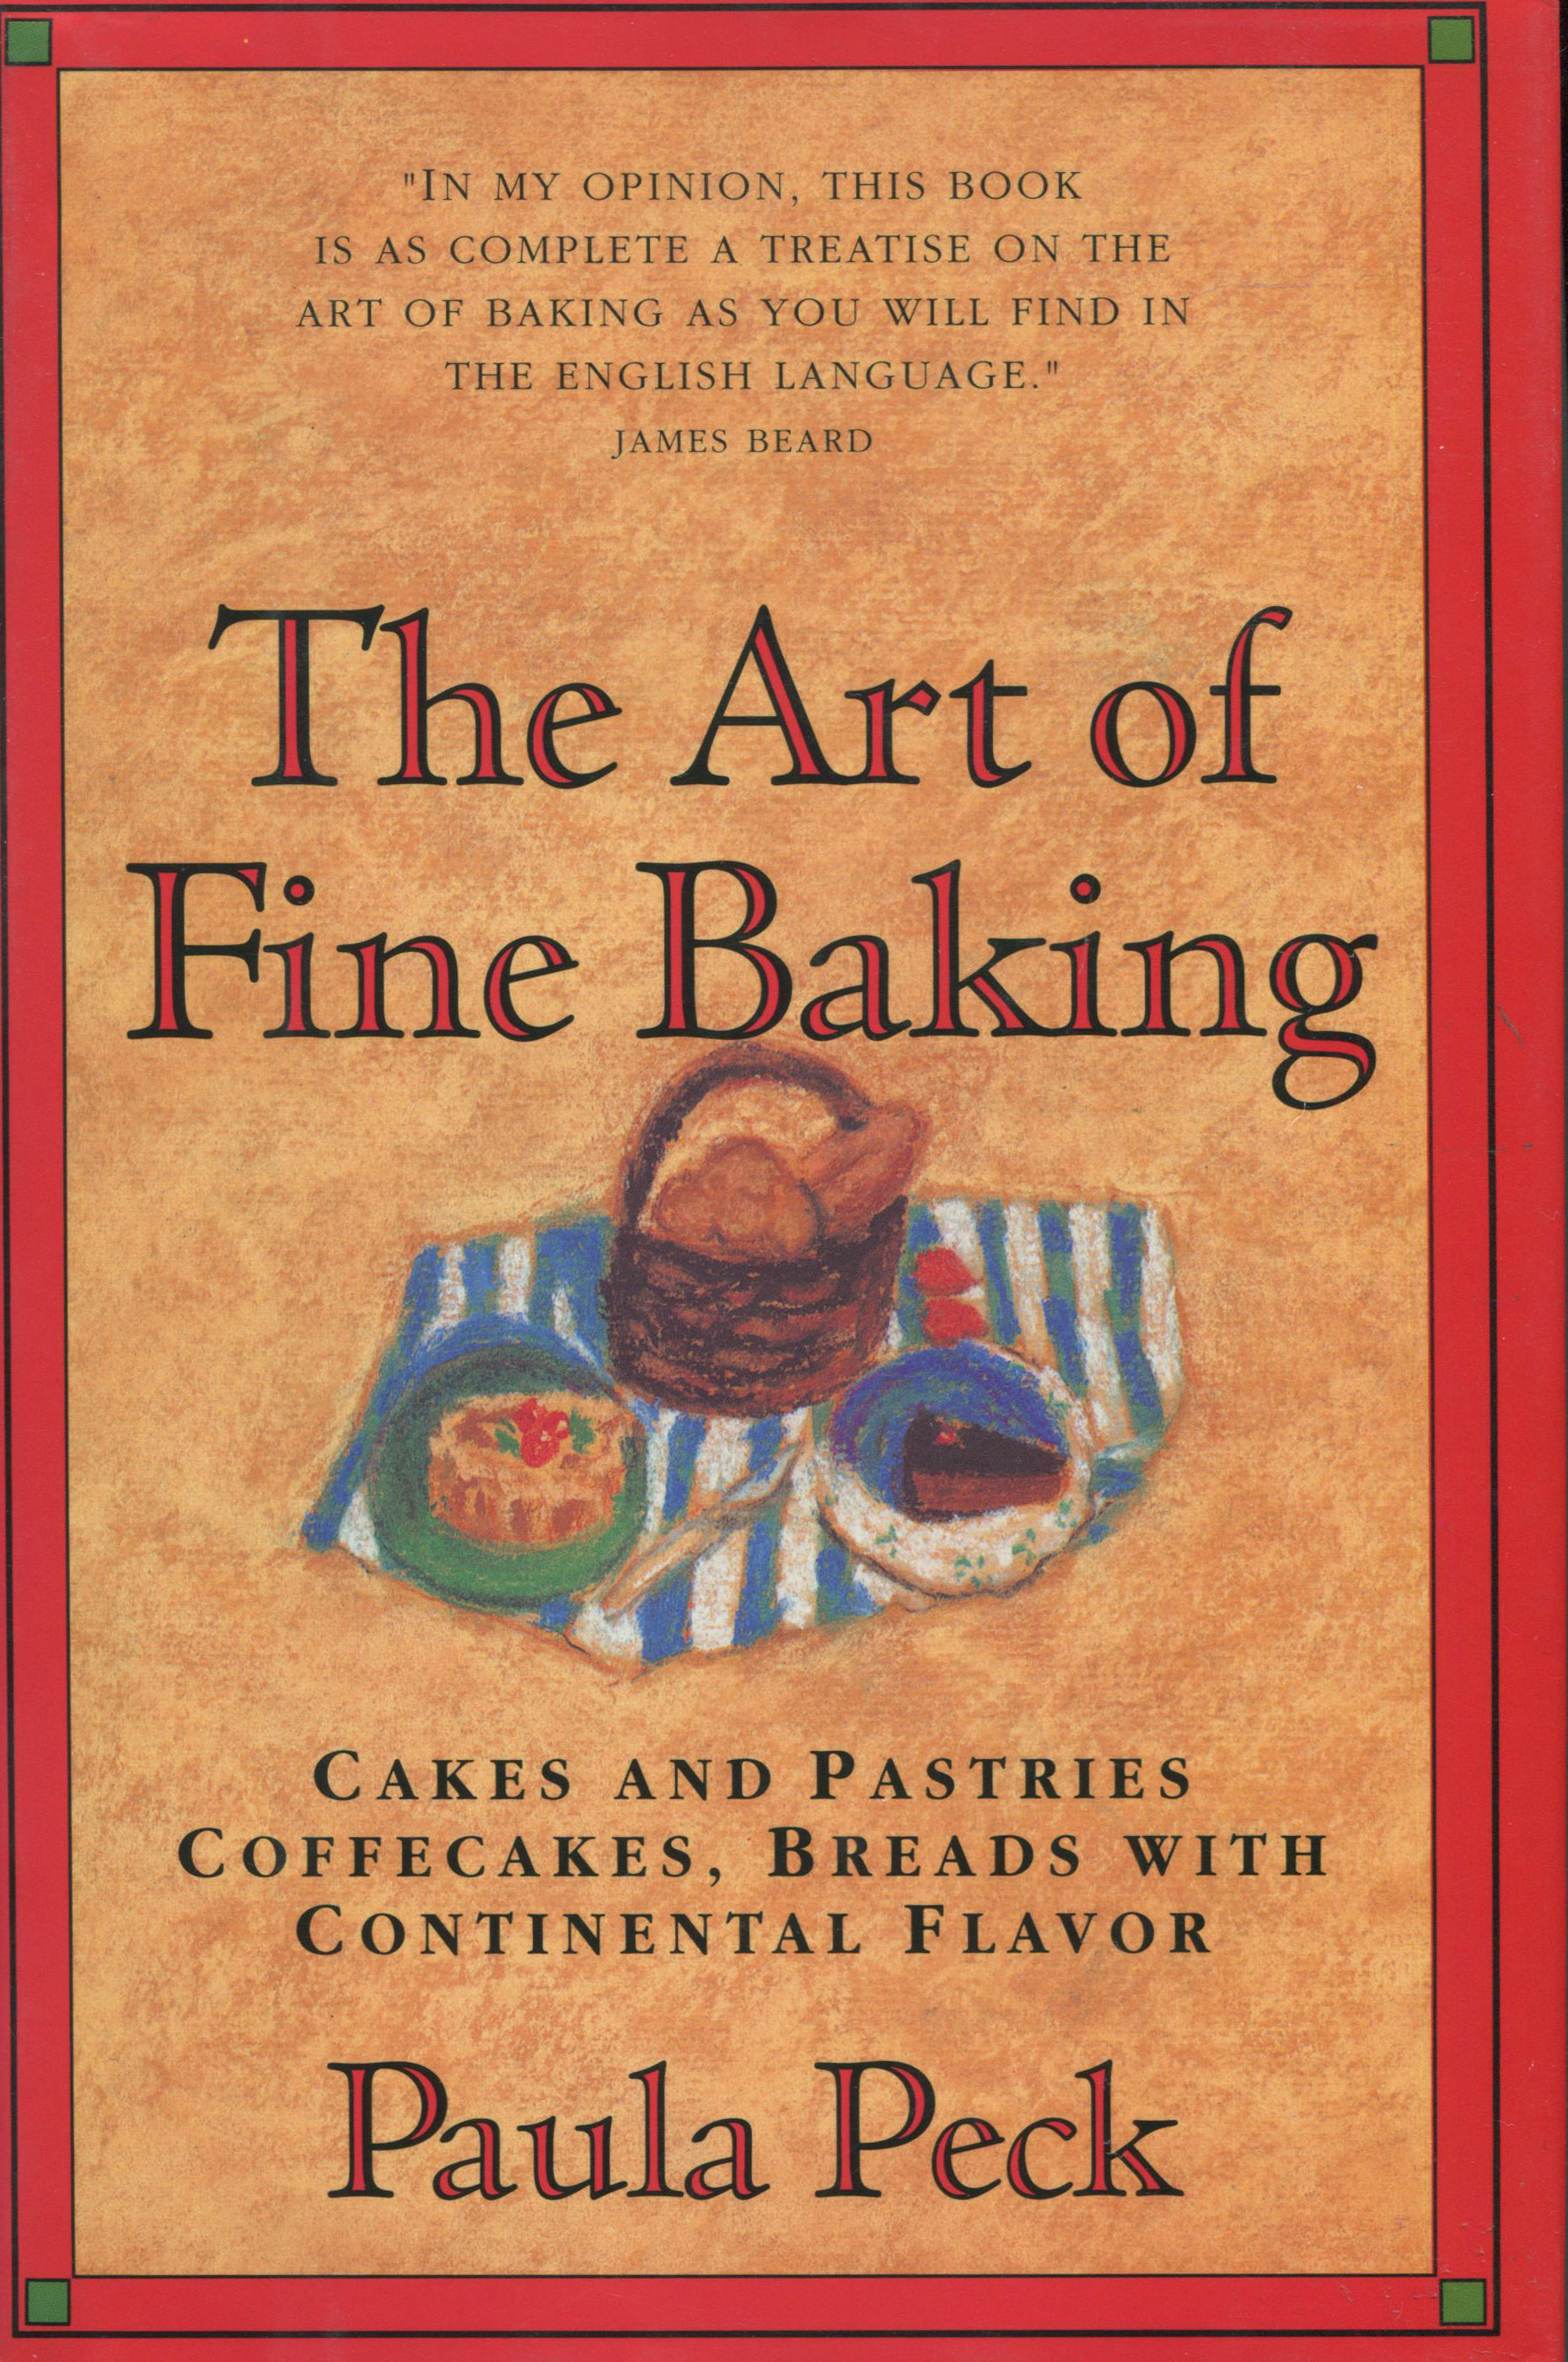 TBT Cookbook Review: The Art of Fine Baking by Paula Peck